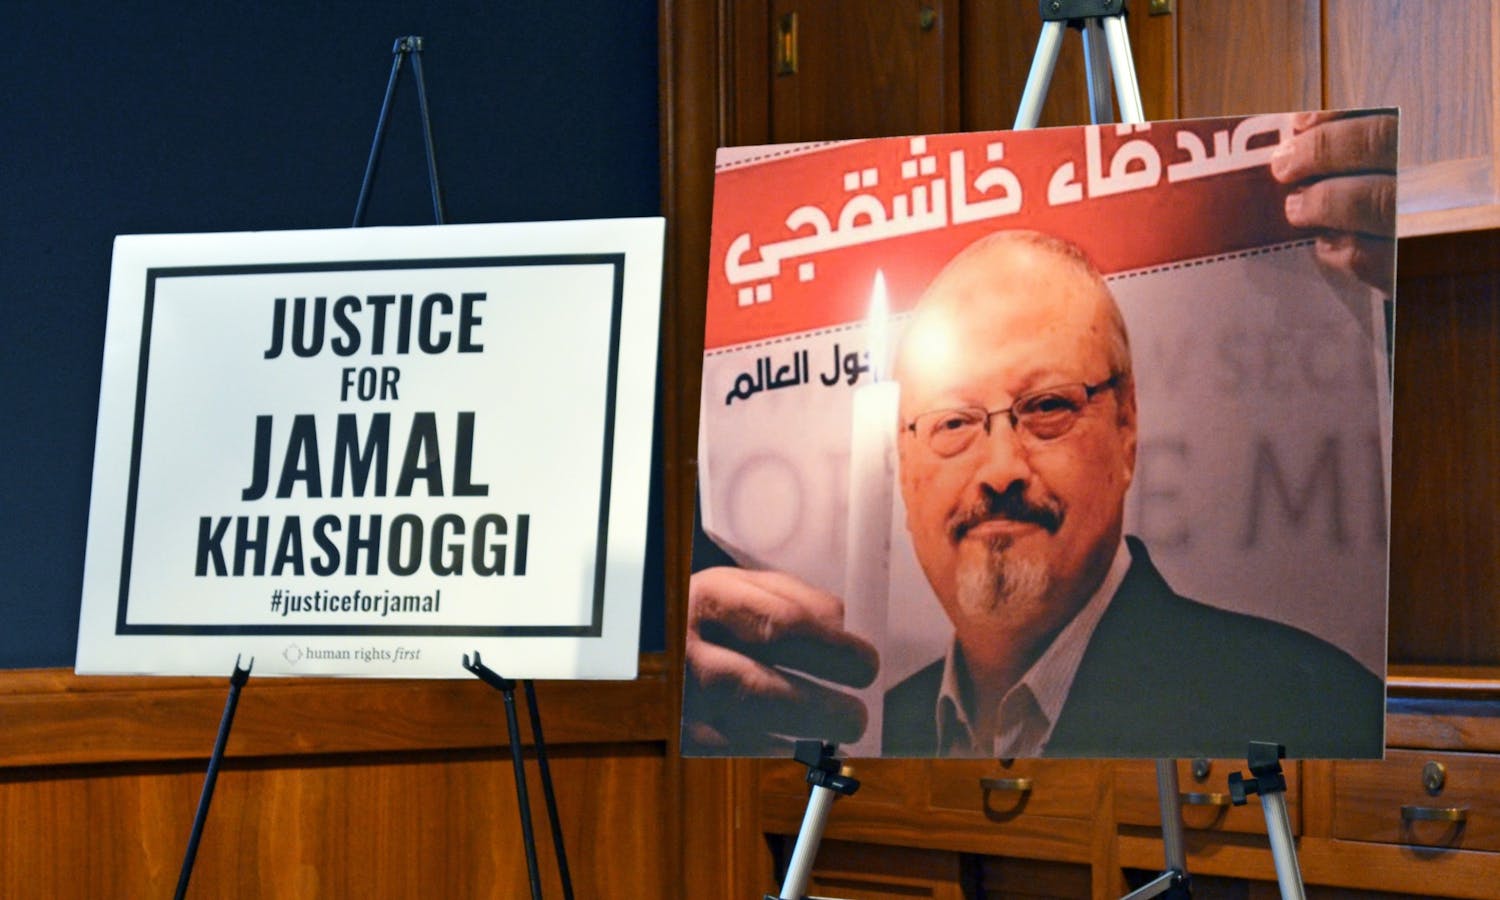 Photo from a conference advocating for justice for Jamal Khashoggi.